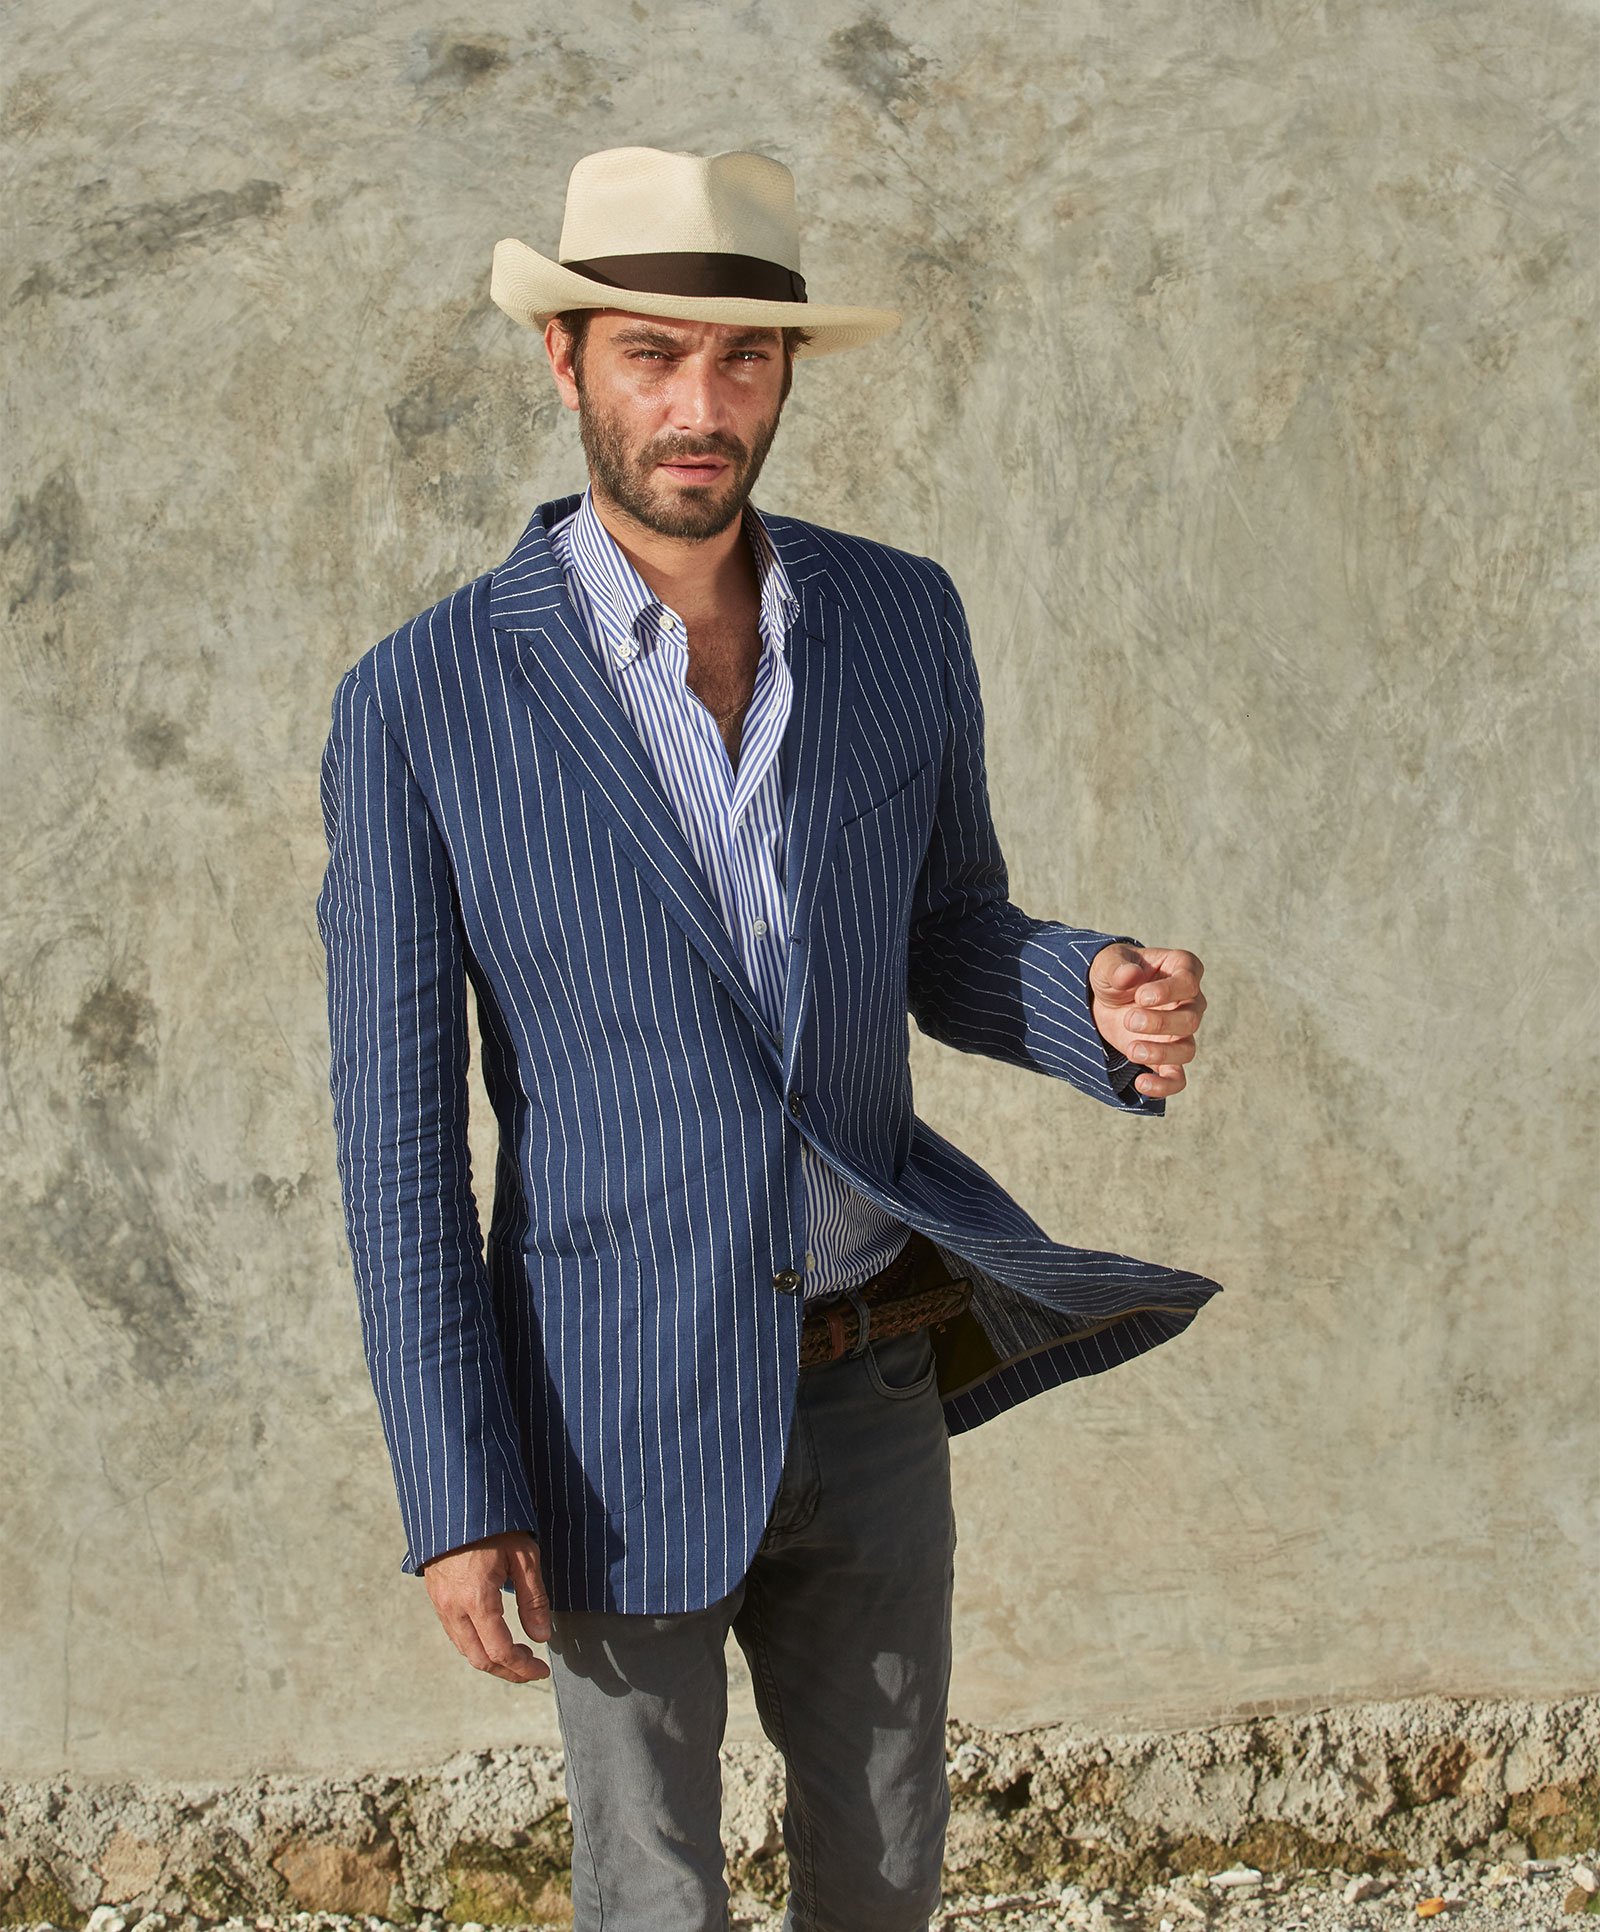 Design
Rarer than a perfect diamond and infinitely more refined, we are proud to carry the most exquisitely crafted Montecristi Panama hats in the world. Depending on the quality of the weave, a Worth & Worth Montecristi Panama Hat can take several months to weave by our master weavers in Ecuador. Available in four different qualities, the result is a hat with a soft texture, translucent appearance, and luminous ivory color.
Material
Our Montecristi Panama straw is handwoven in Ecuador and available in 4 different qualities: Artisan, Master, Museum, and Superfino.
Specifications
With its teardrop Style, our Montecristi Casablanca combines a 3 3/4” to a 4 crown (depending on your head size) with a 2 3/4 to a 3 1/8 brim. The larger brim offers ample shade for the next time you find yourself headed to the Tropics. Handwoven by our master weavers in Ecuador Handcrafted in New York Truly a work of art.